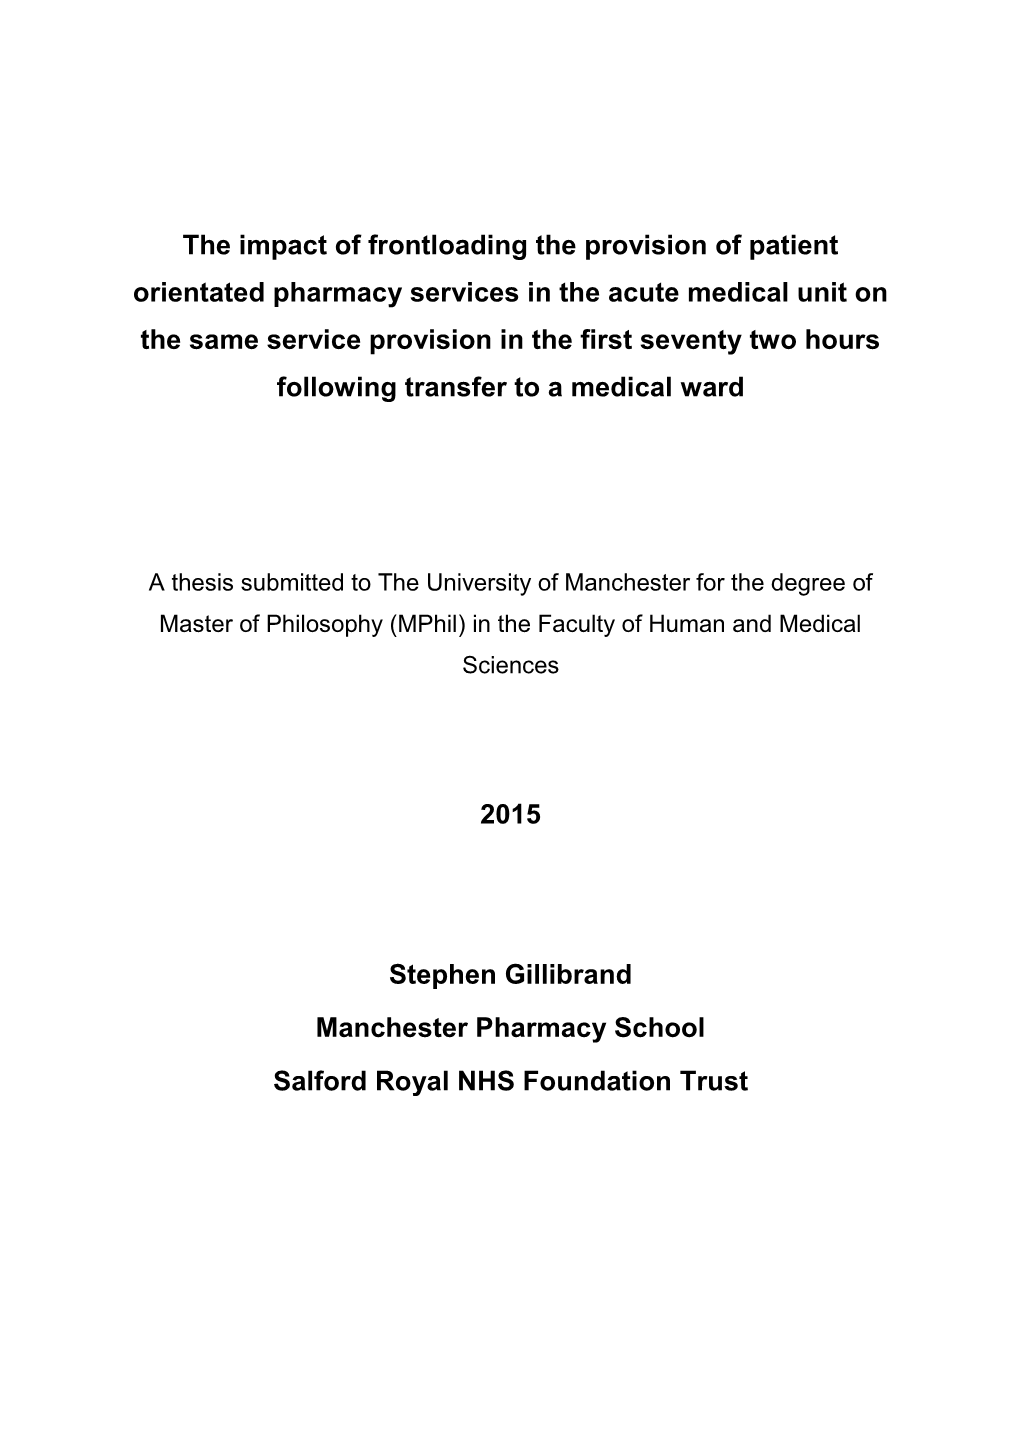 The Impact of Frontloading the Provision of Patient